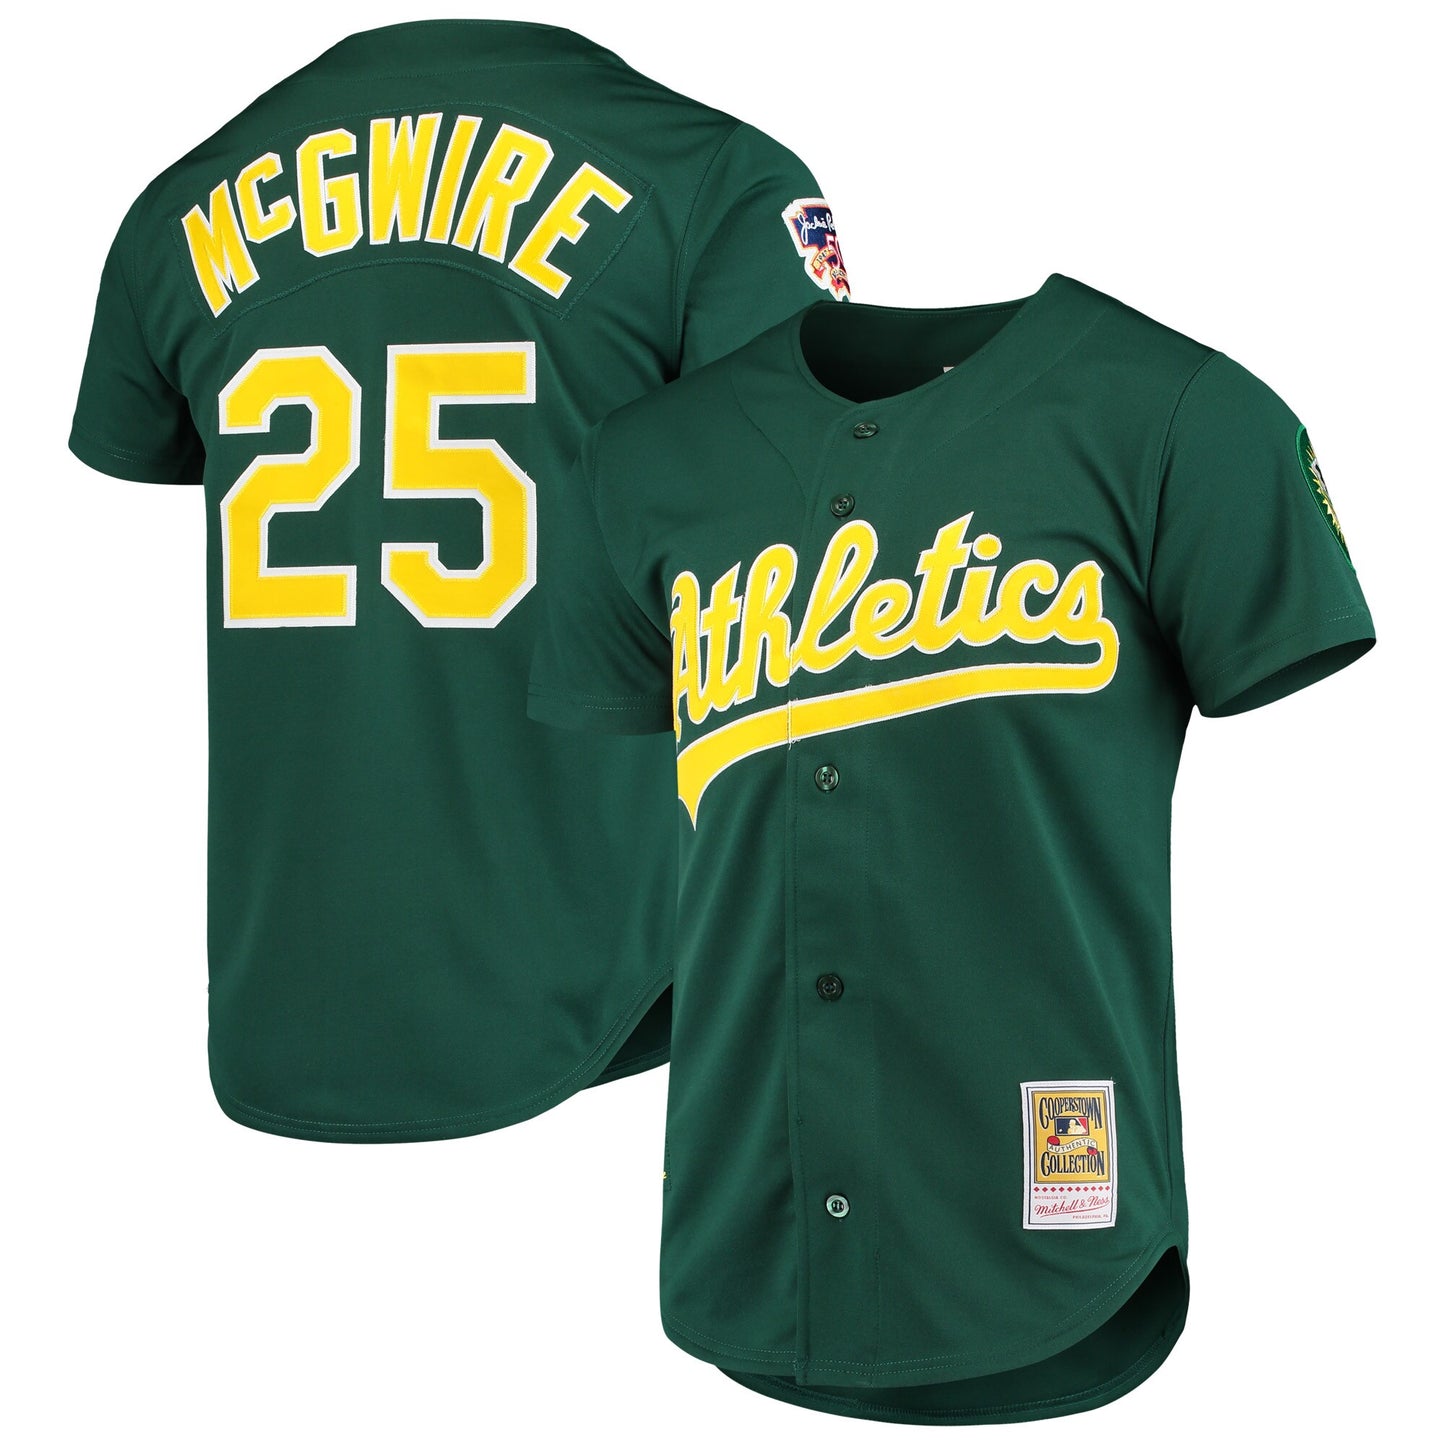 Mark McGwire Oakland Athletics Mitchell & Ness 1997 Cooperstown Collection Authentic Jersey - Green